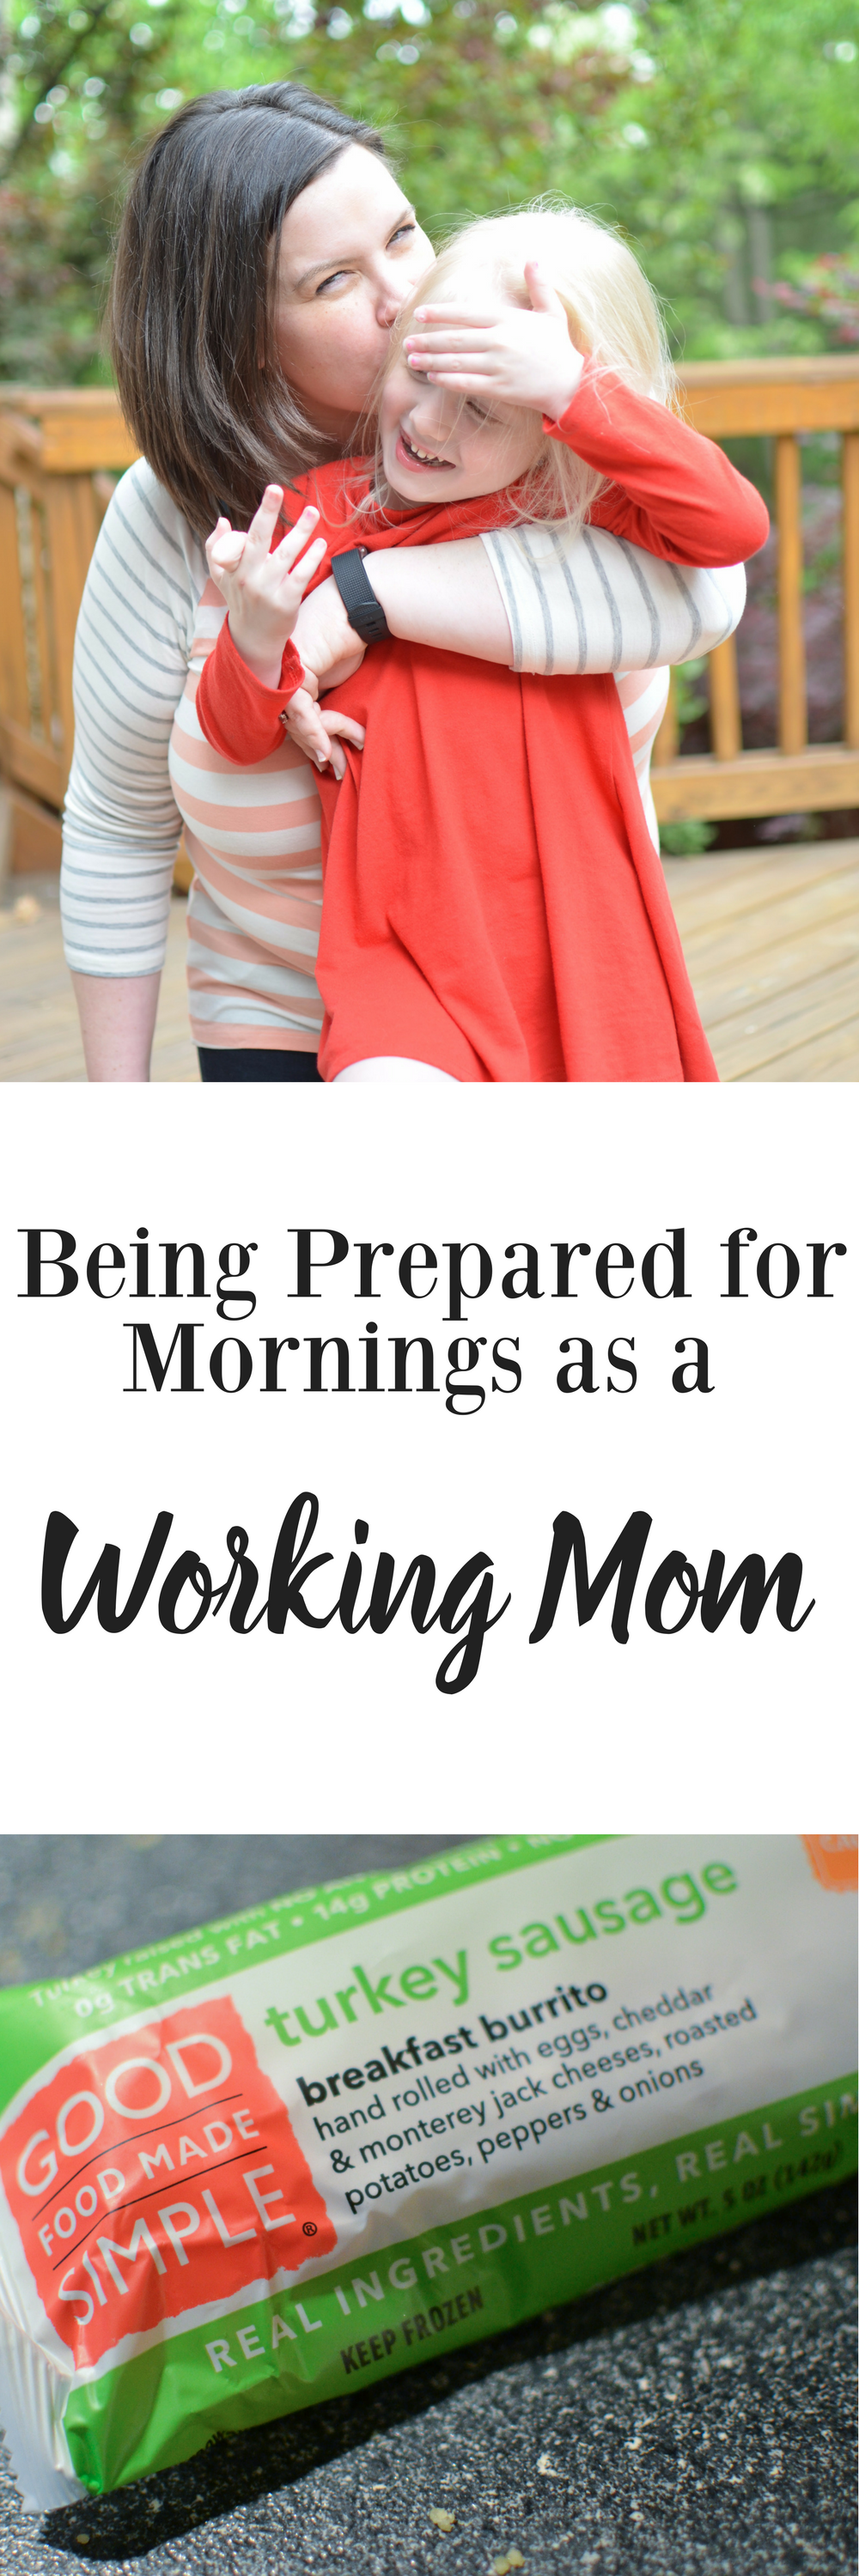 Getting out of the house in the morning is tough for any mom, but working moms have a few more challenges. Tips for getting out of the house in the morning with everything you need - and still making it to the office on time!